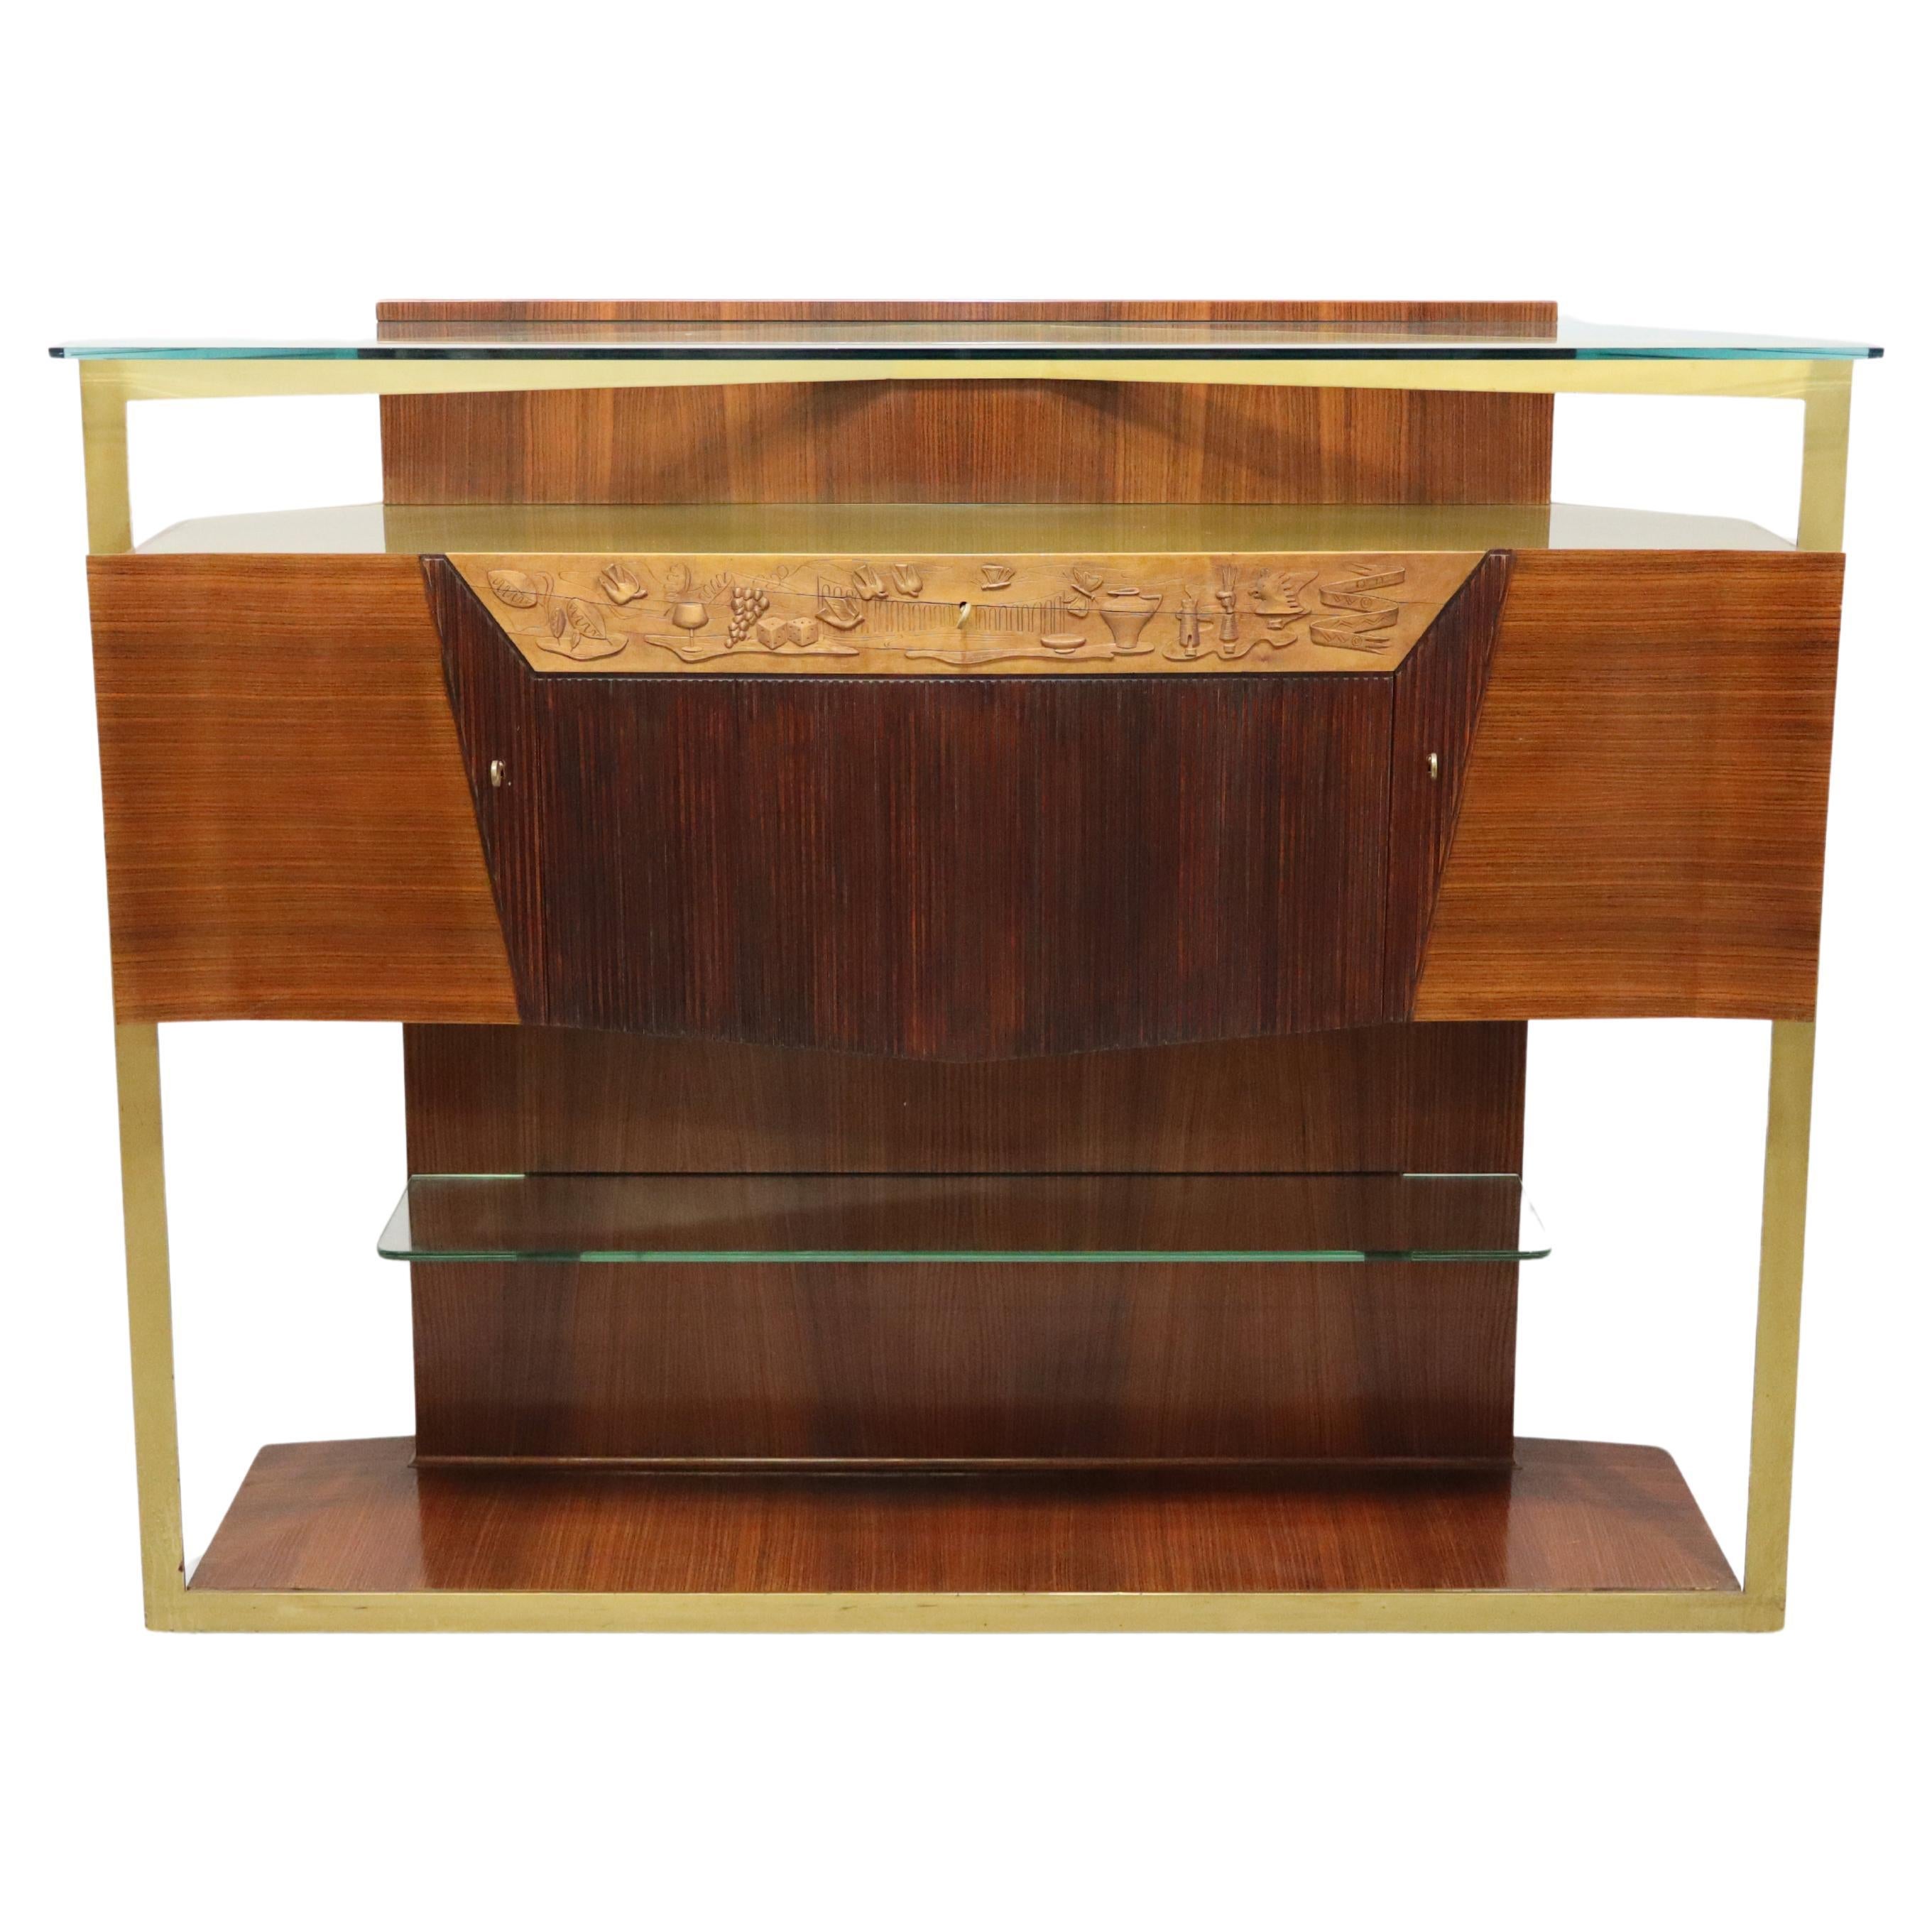 Italian Midcentury Rosewood Sideboard or Bar Cabinet by Vittorio Dassi, 1950s